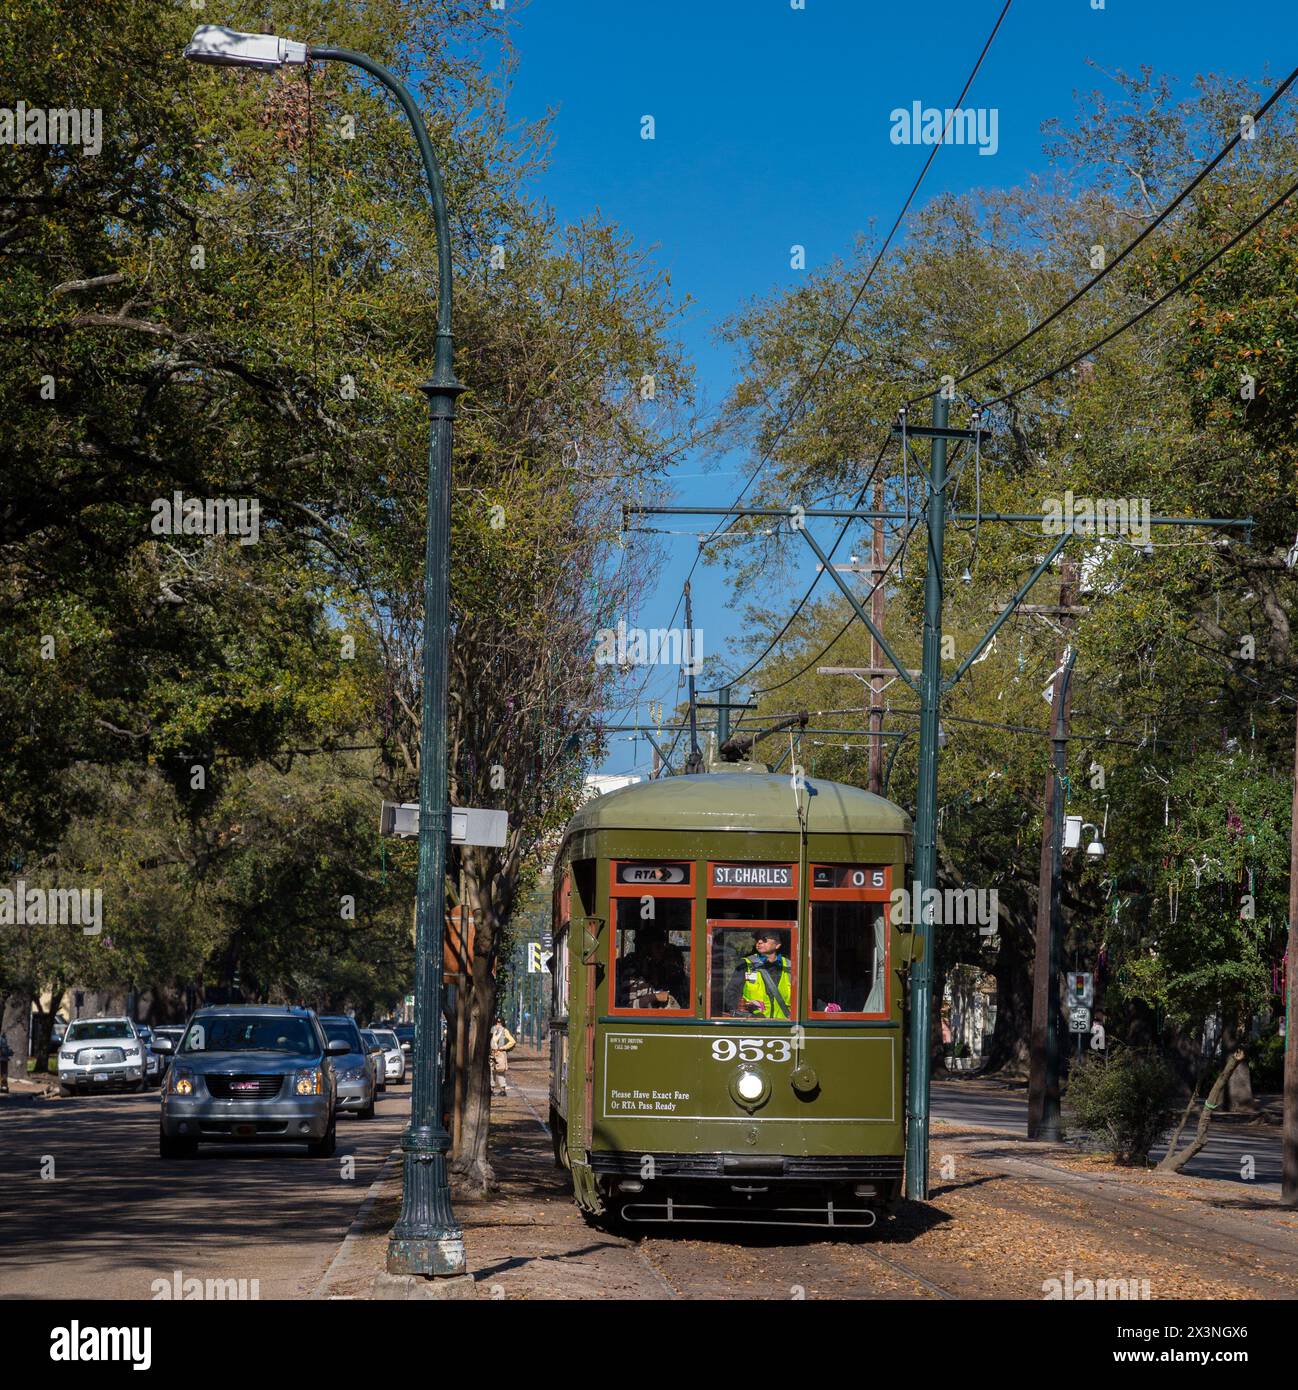 Garden District, New Orleans, Louisiana.  St. Charles Streetcar. Stock Photo